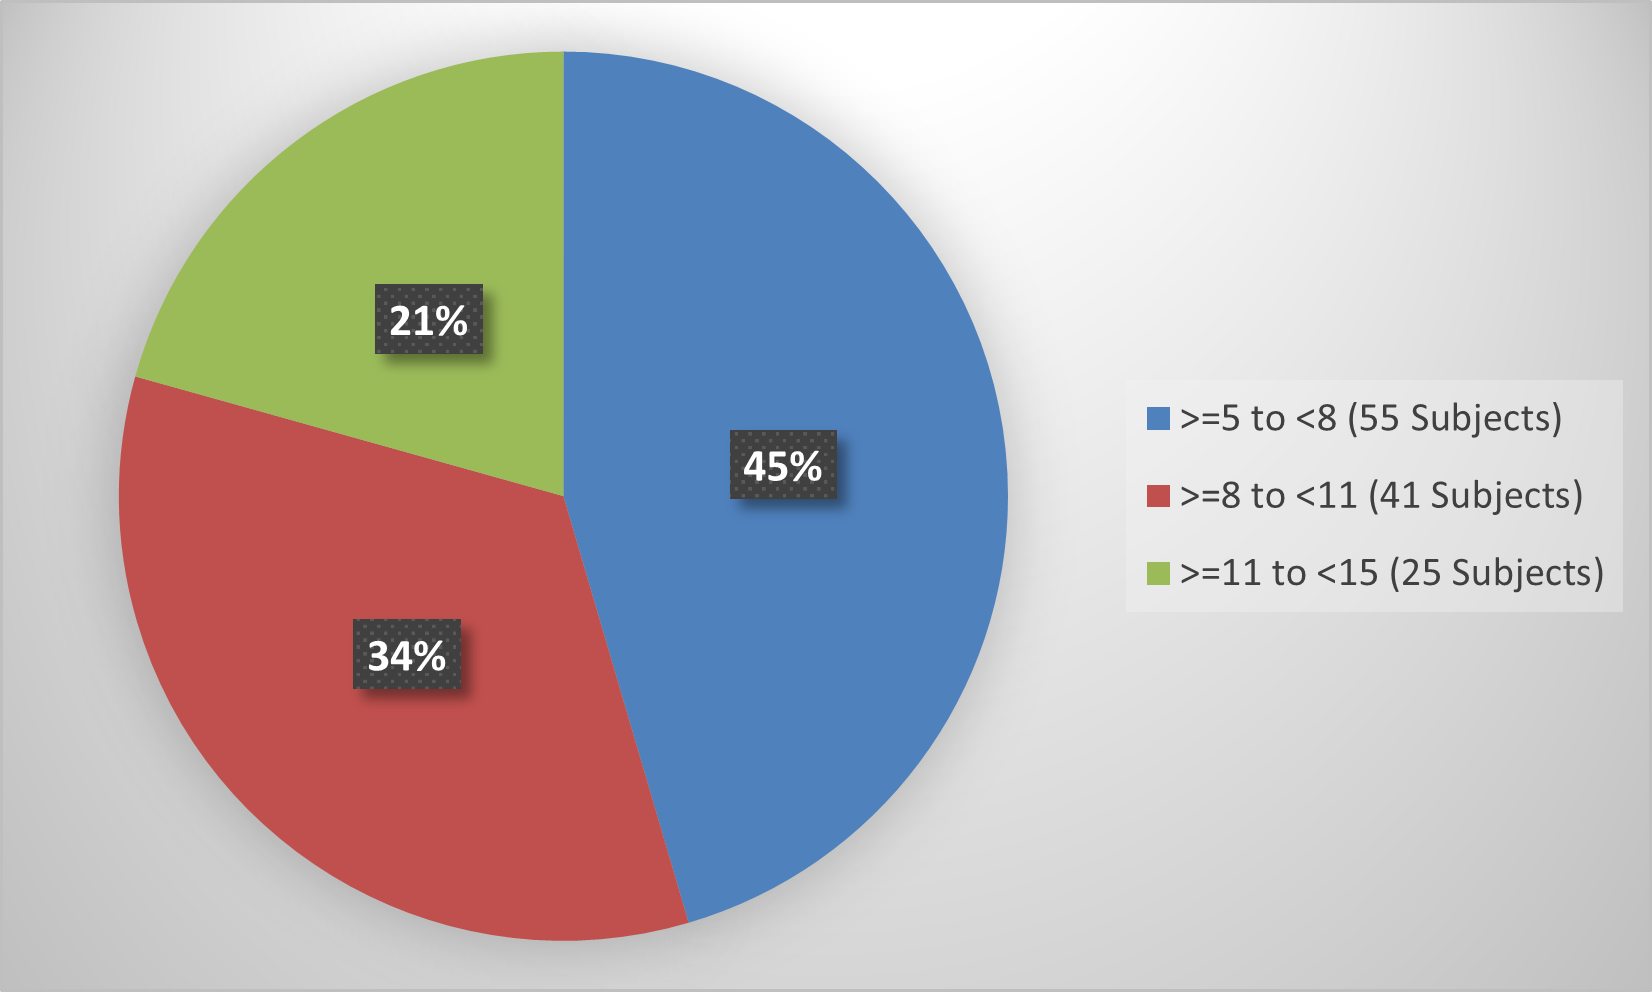 Pie chart summarizing how many patients by age were in the clinical trial. In total, 55 (45%%) patients between the age of 5 and 8,  41(34%) patients between the age of 8 and 11, and 25(21%) between the years of age 11 and 15 participated in the clinical trial.